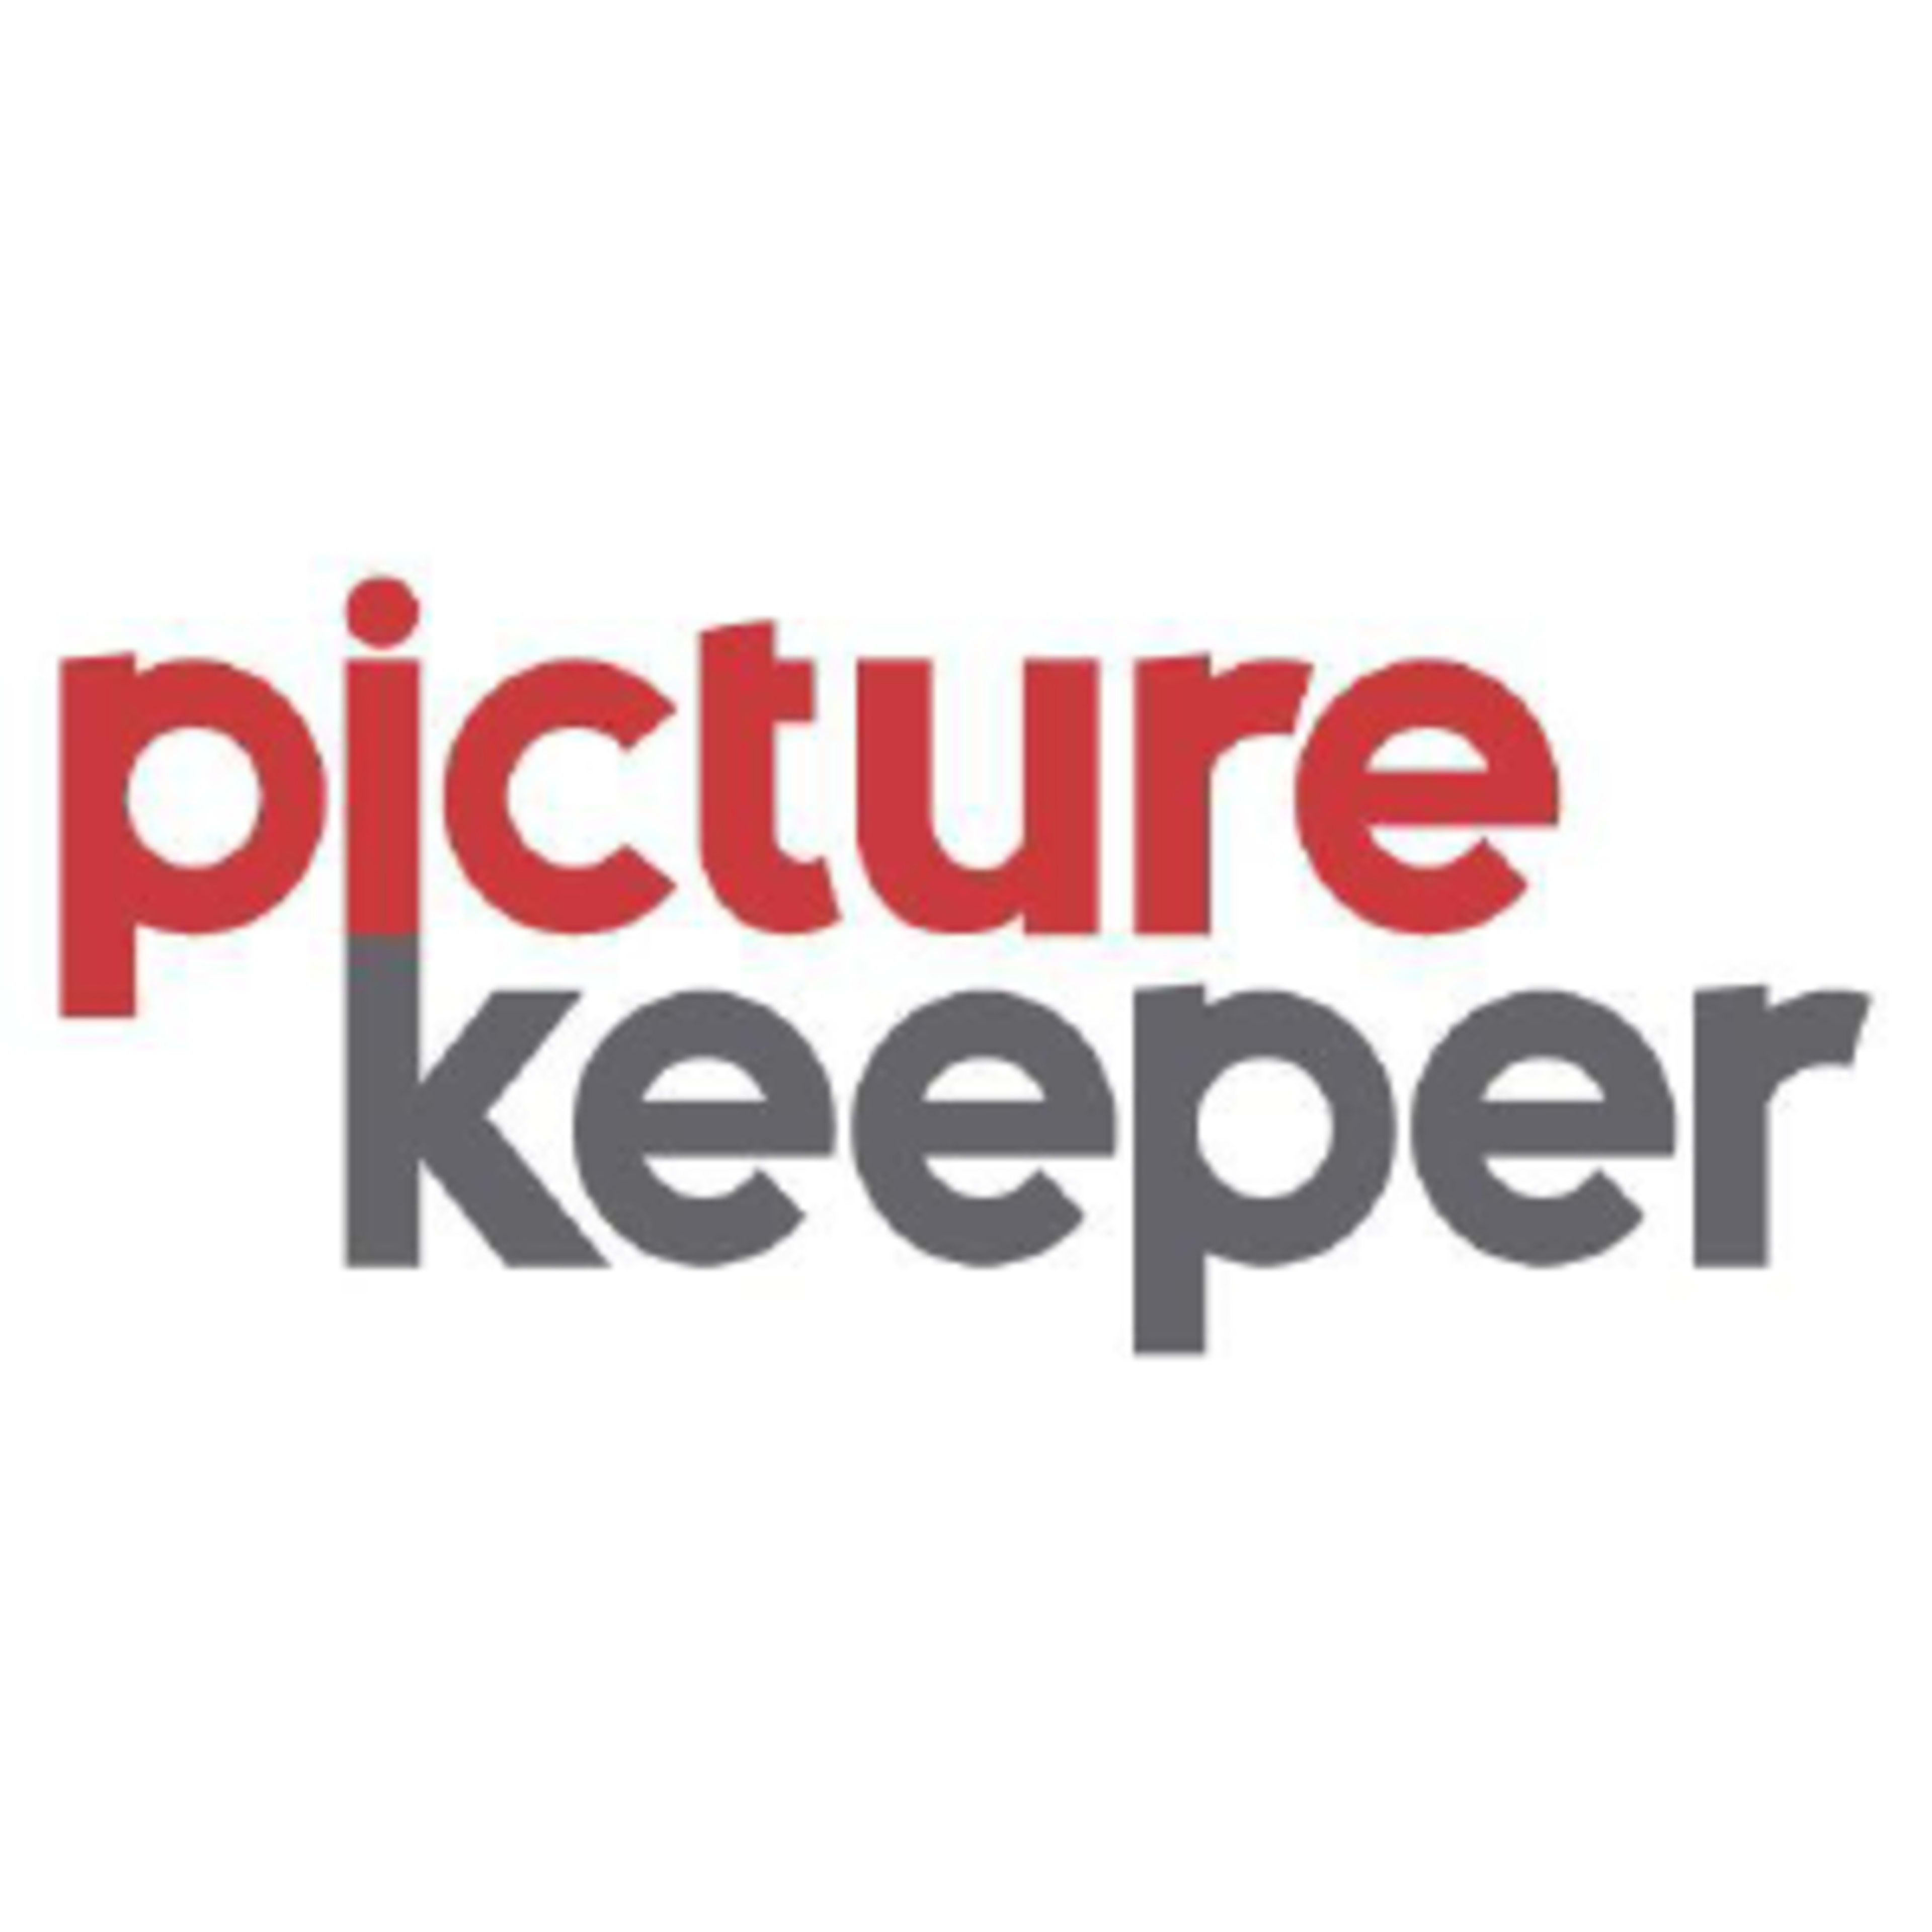 Picture Keeper Code